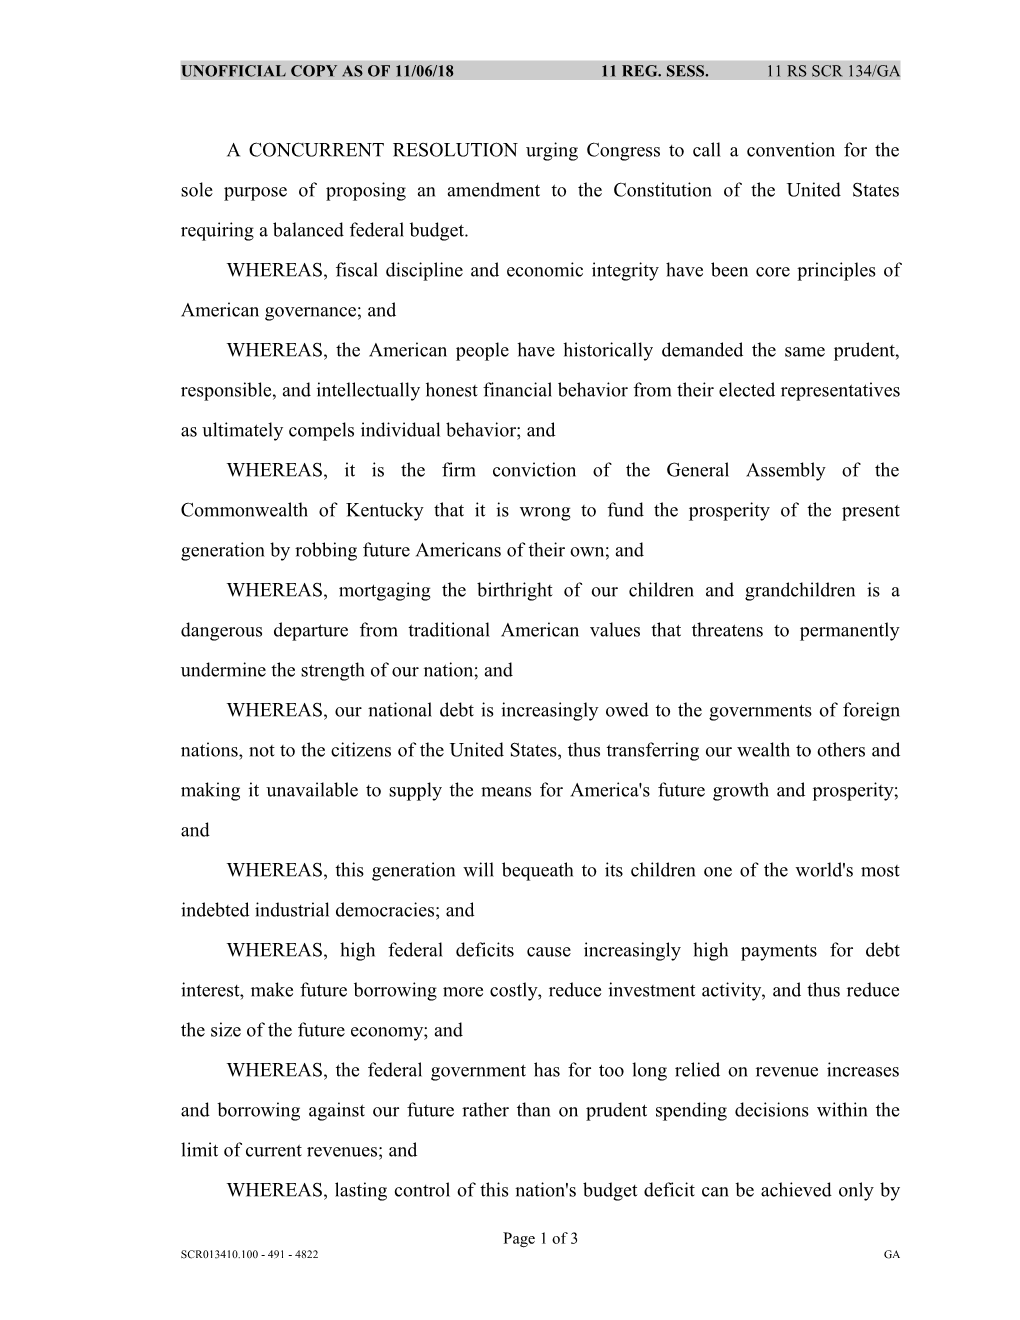 A CONCURRENT RESOLUTION Urging Congress to Call a Convention for the Sole Purpose of Proposing